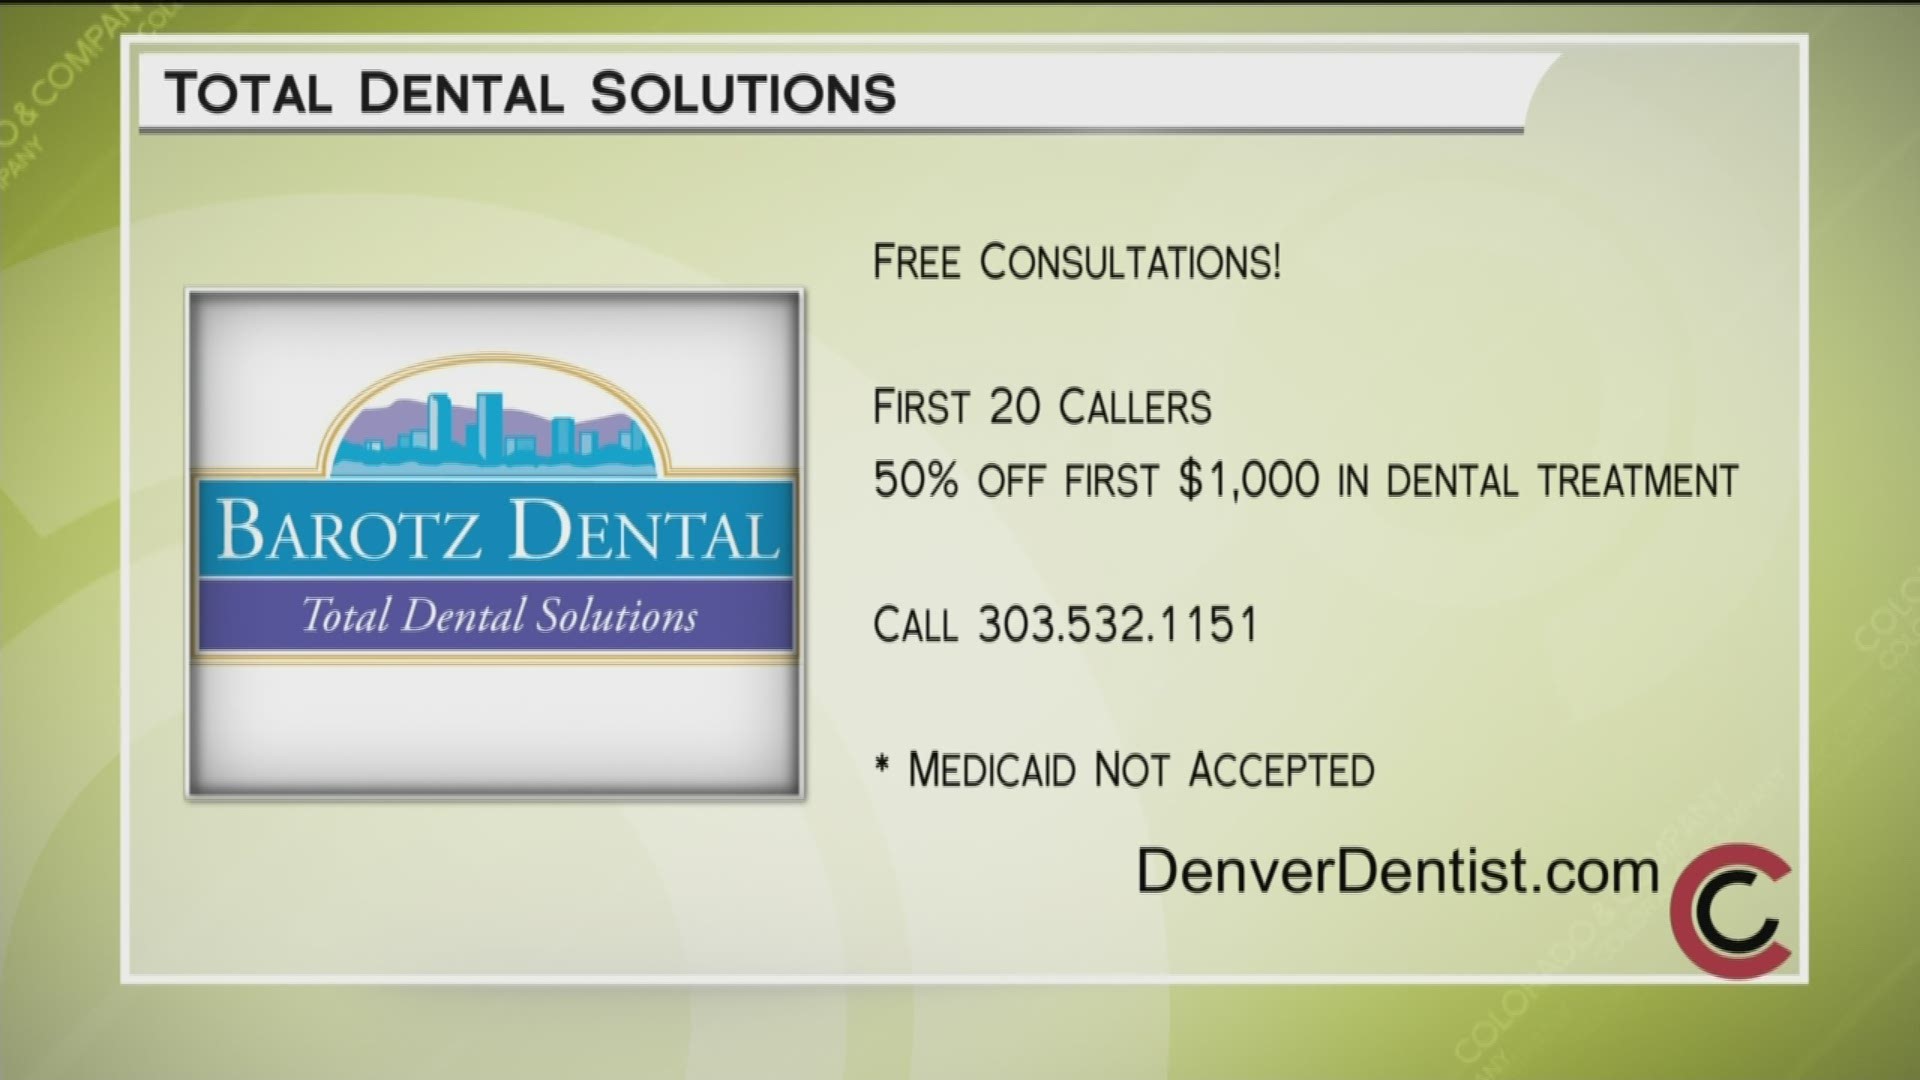 Schedule your free consultation with Dr. Barotz and his team today. Call 303.532.1151 or visit DenverDentist.com to learn how they can help you and your smile.